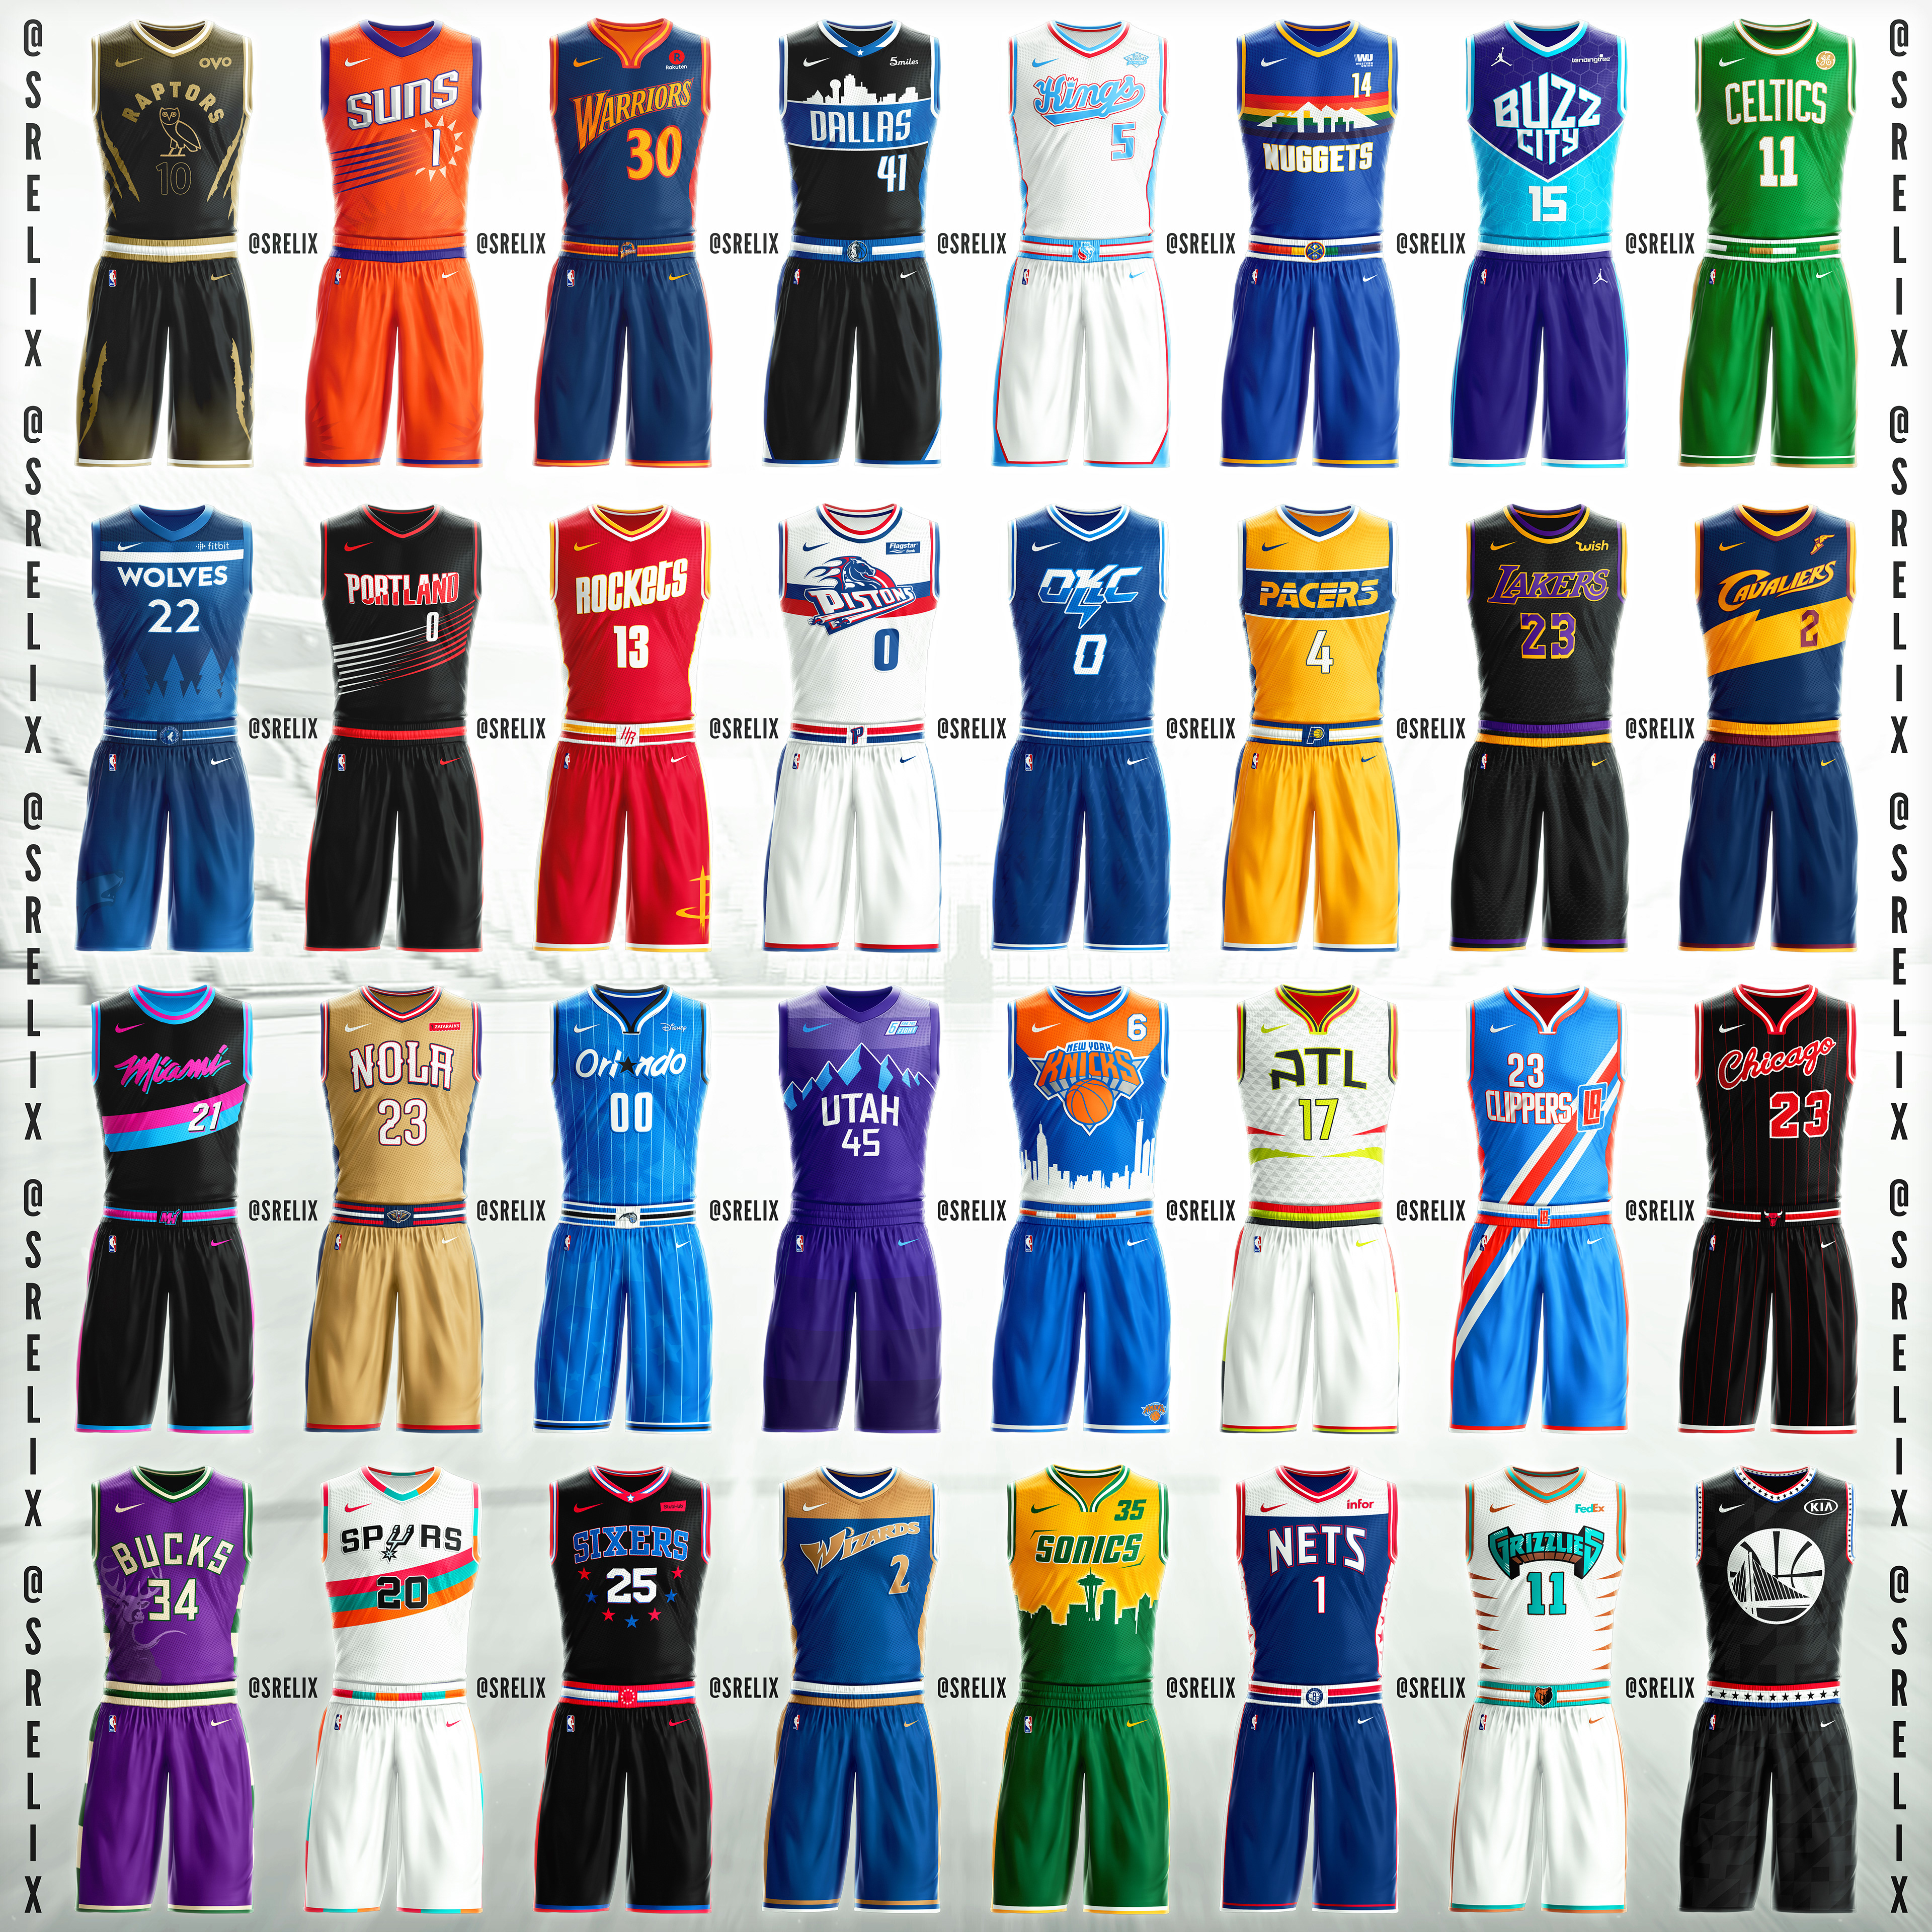 new nba jersey concepts